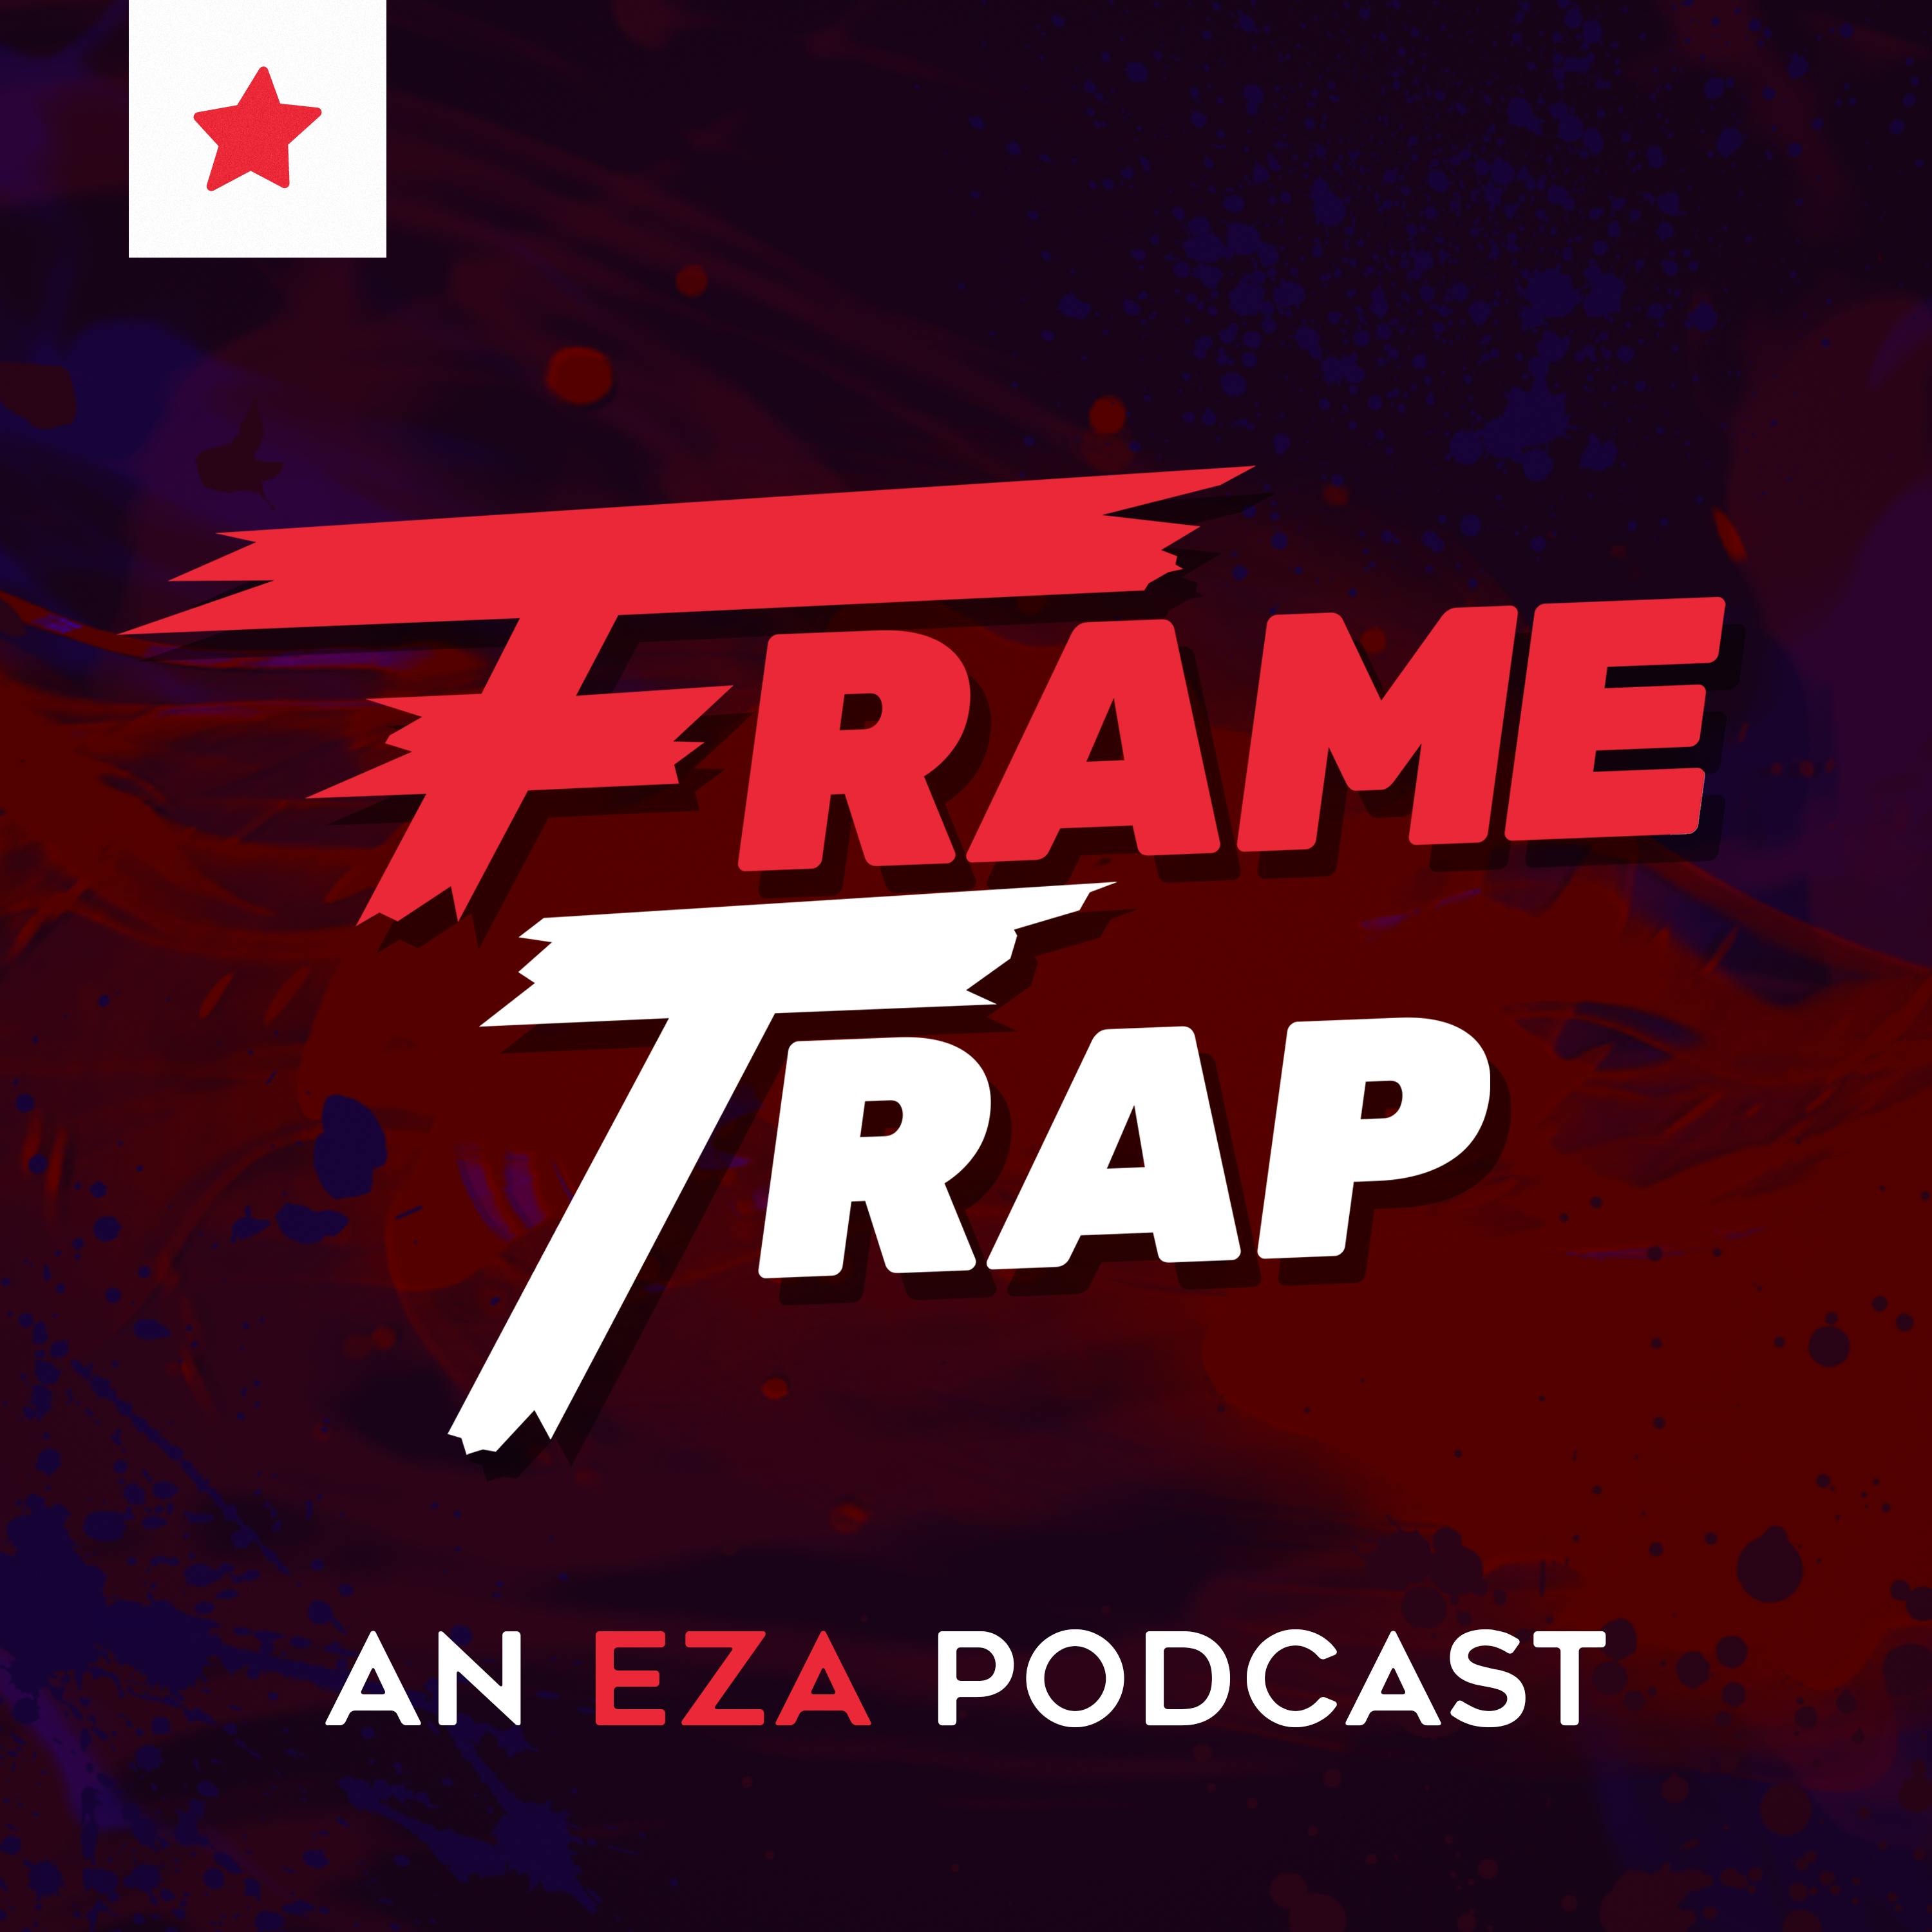 Frame Trap - Episode 193 " Fast Cars & Lies of P